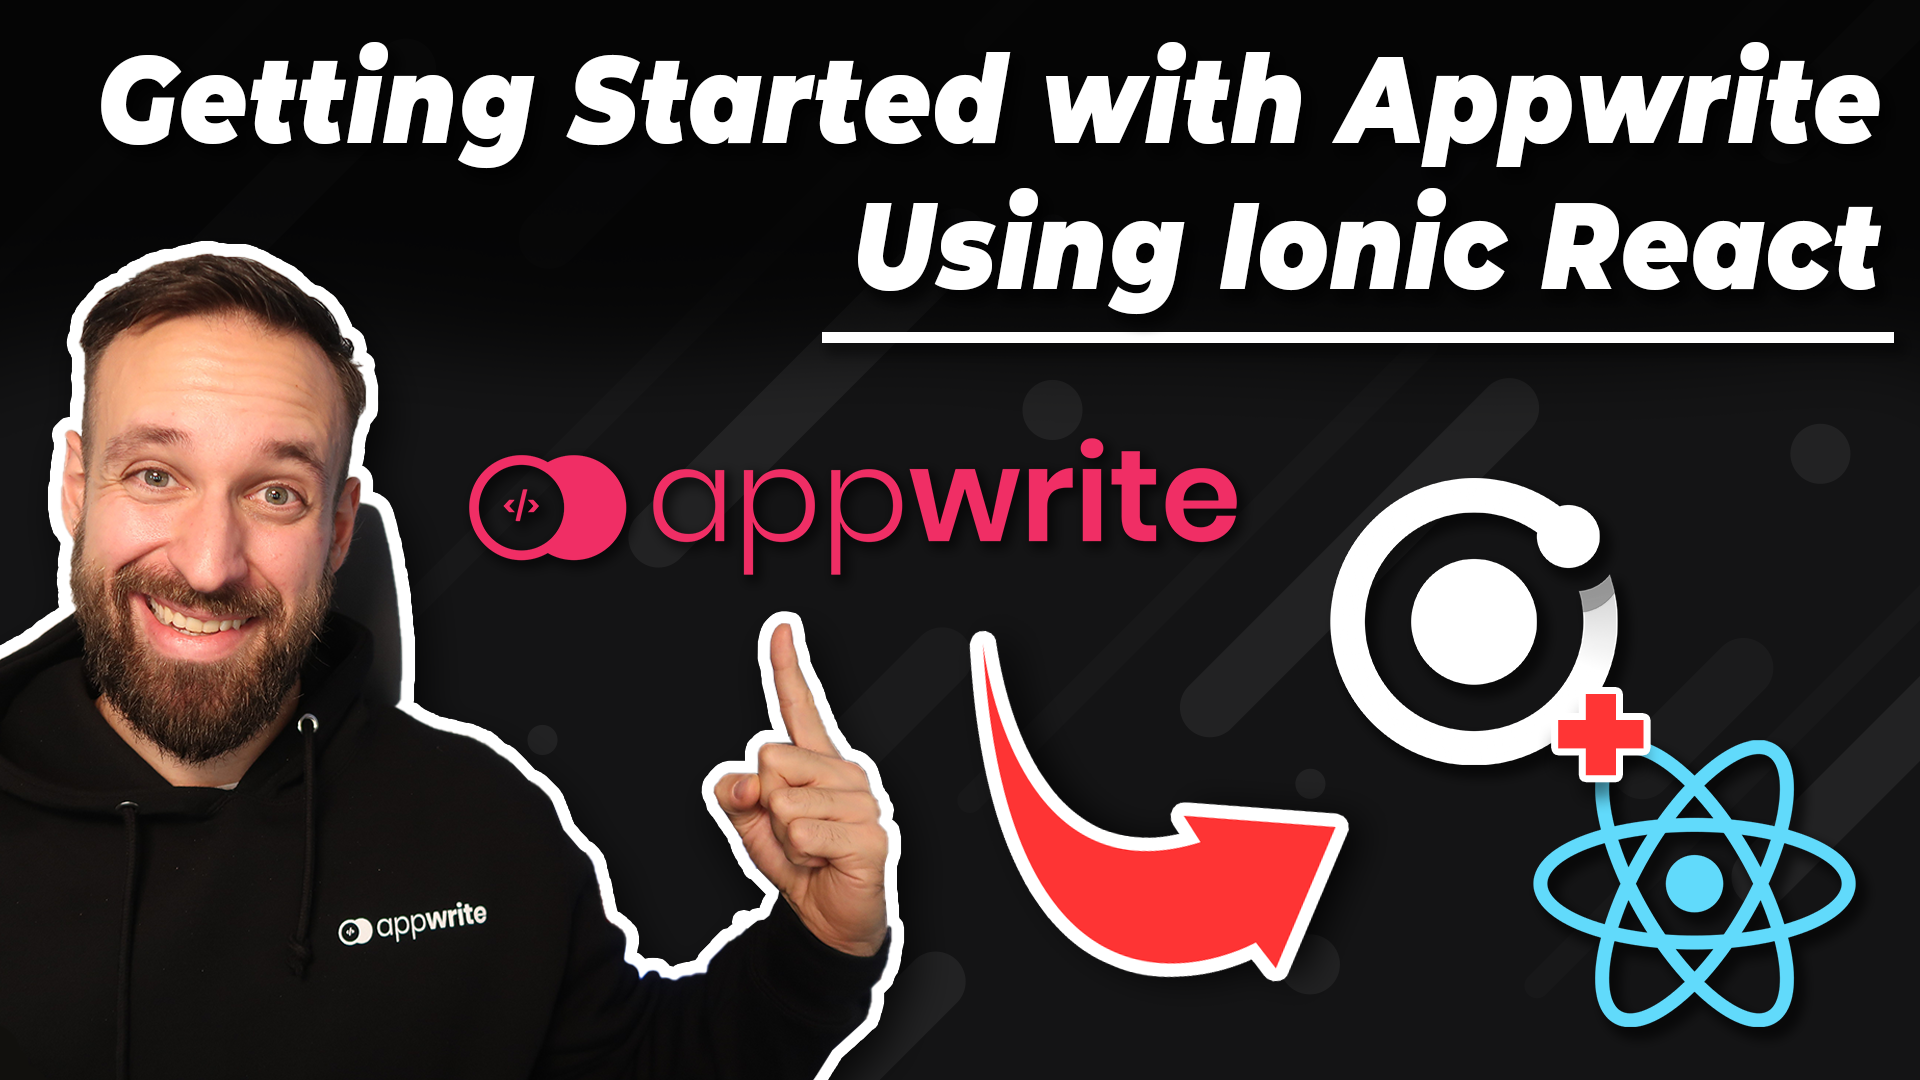 Getting Started with Appwrite using Ionic React